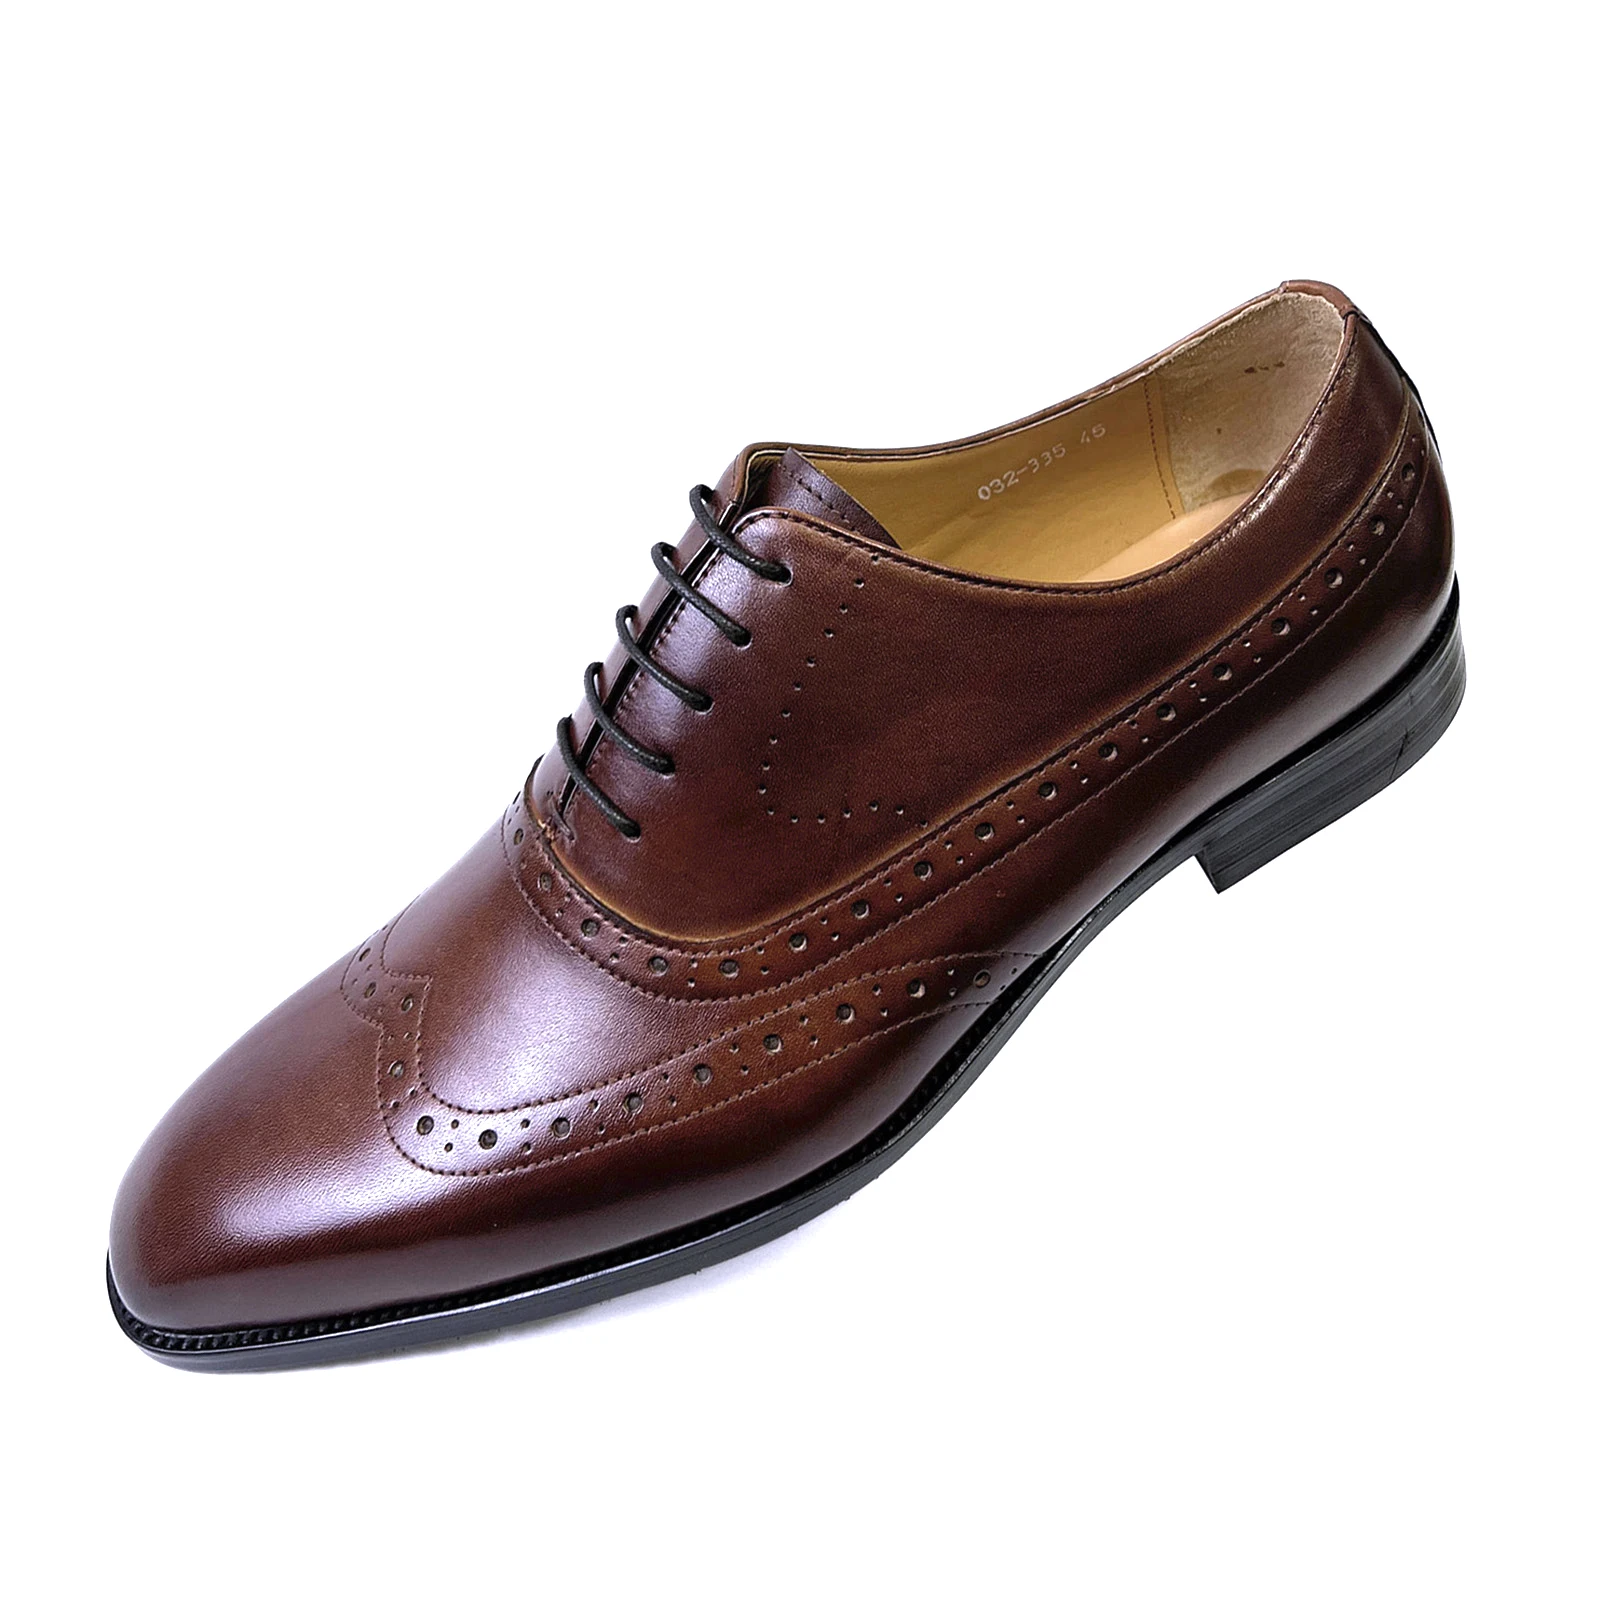 LUXURY BRAND OXFORD LEATHER SHOES BLACK BROWN HAND-POLISHED LACE UP POINTED TOE MEN'S DRESS WEDDING OFFICE BUSINESS FORMAL SHOES